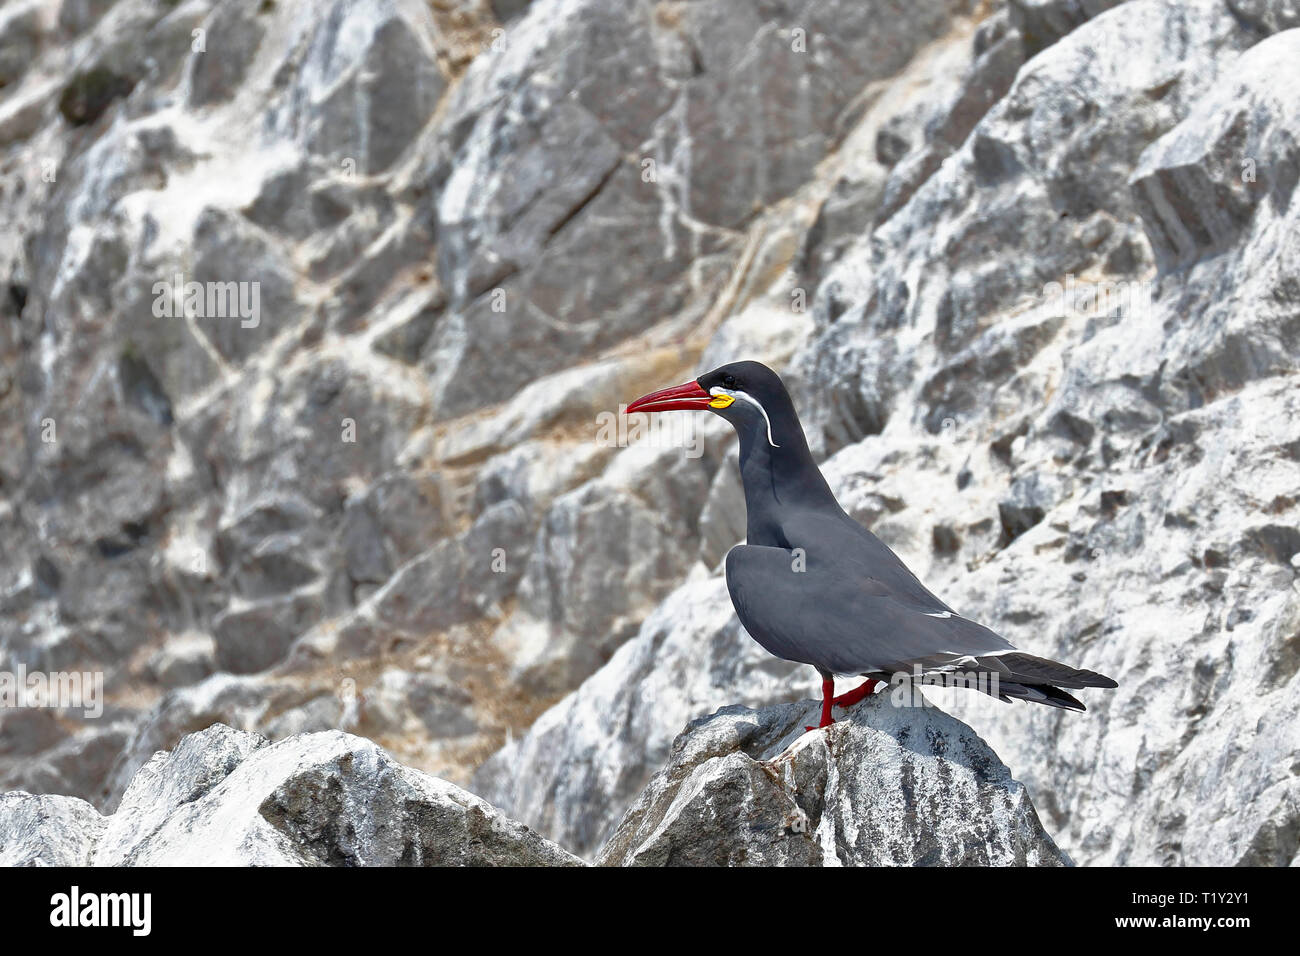 Inca tern (Larosterna inca) perched in freedom on a rocky boulder of the Ballestas Islands in Paracas, Peru. Stock Photo